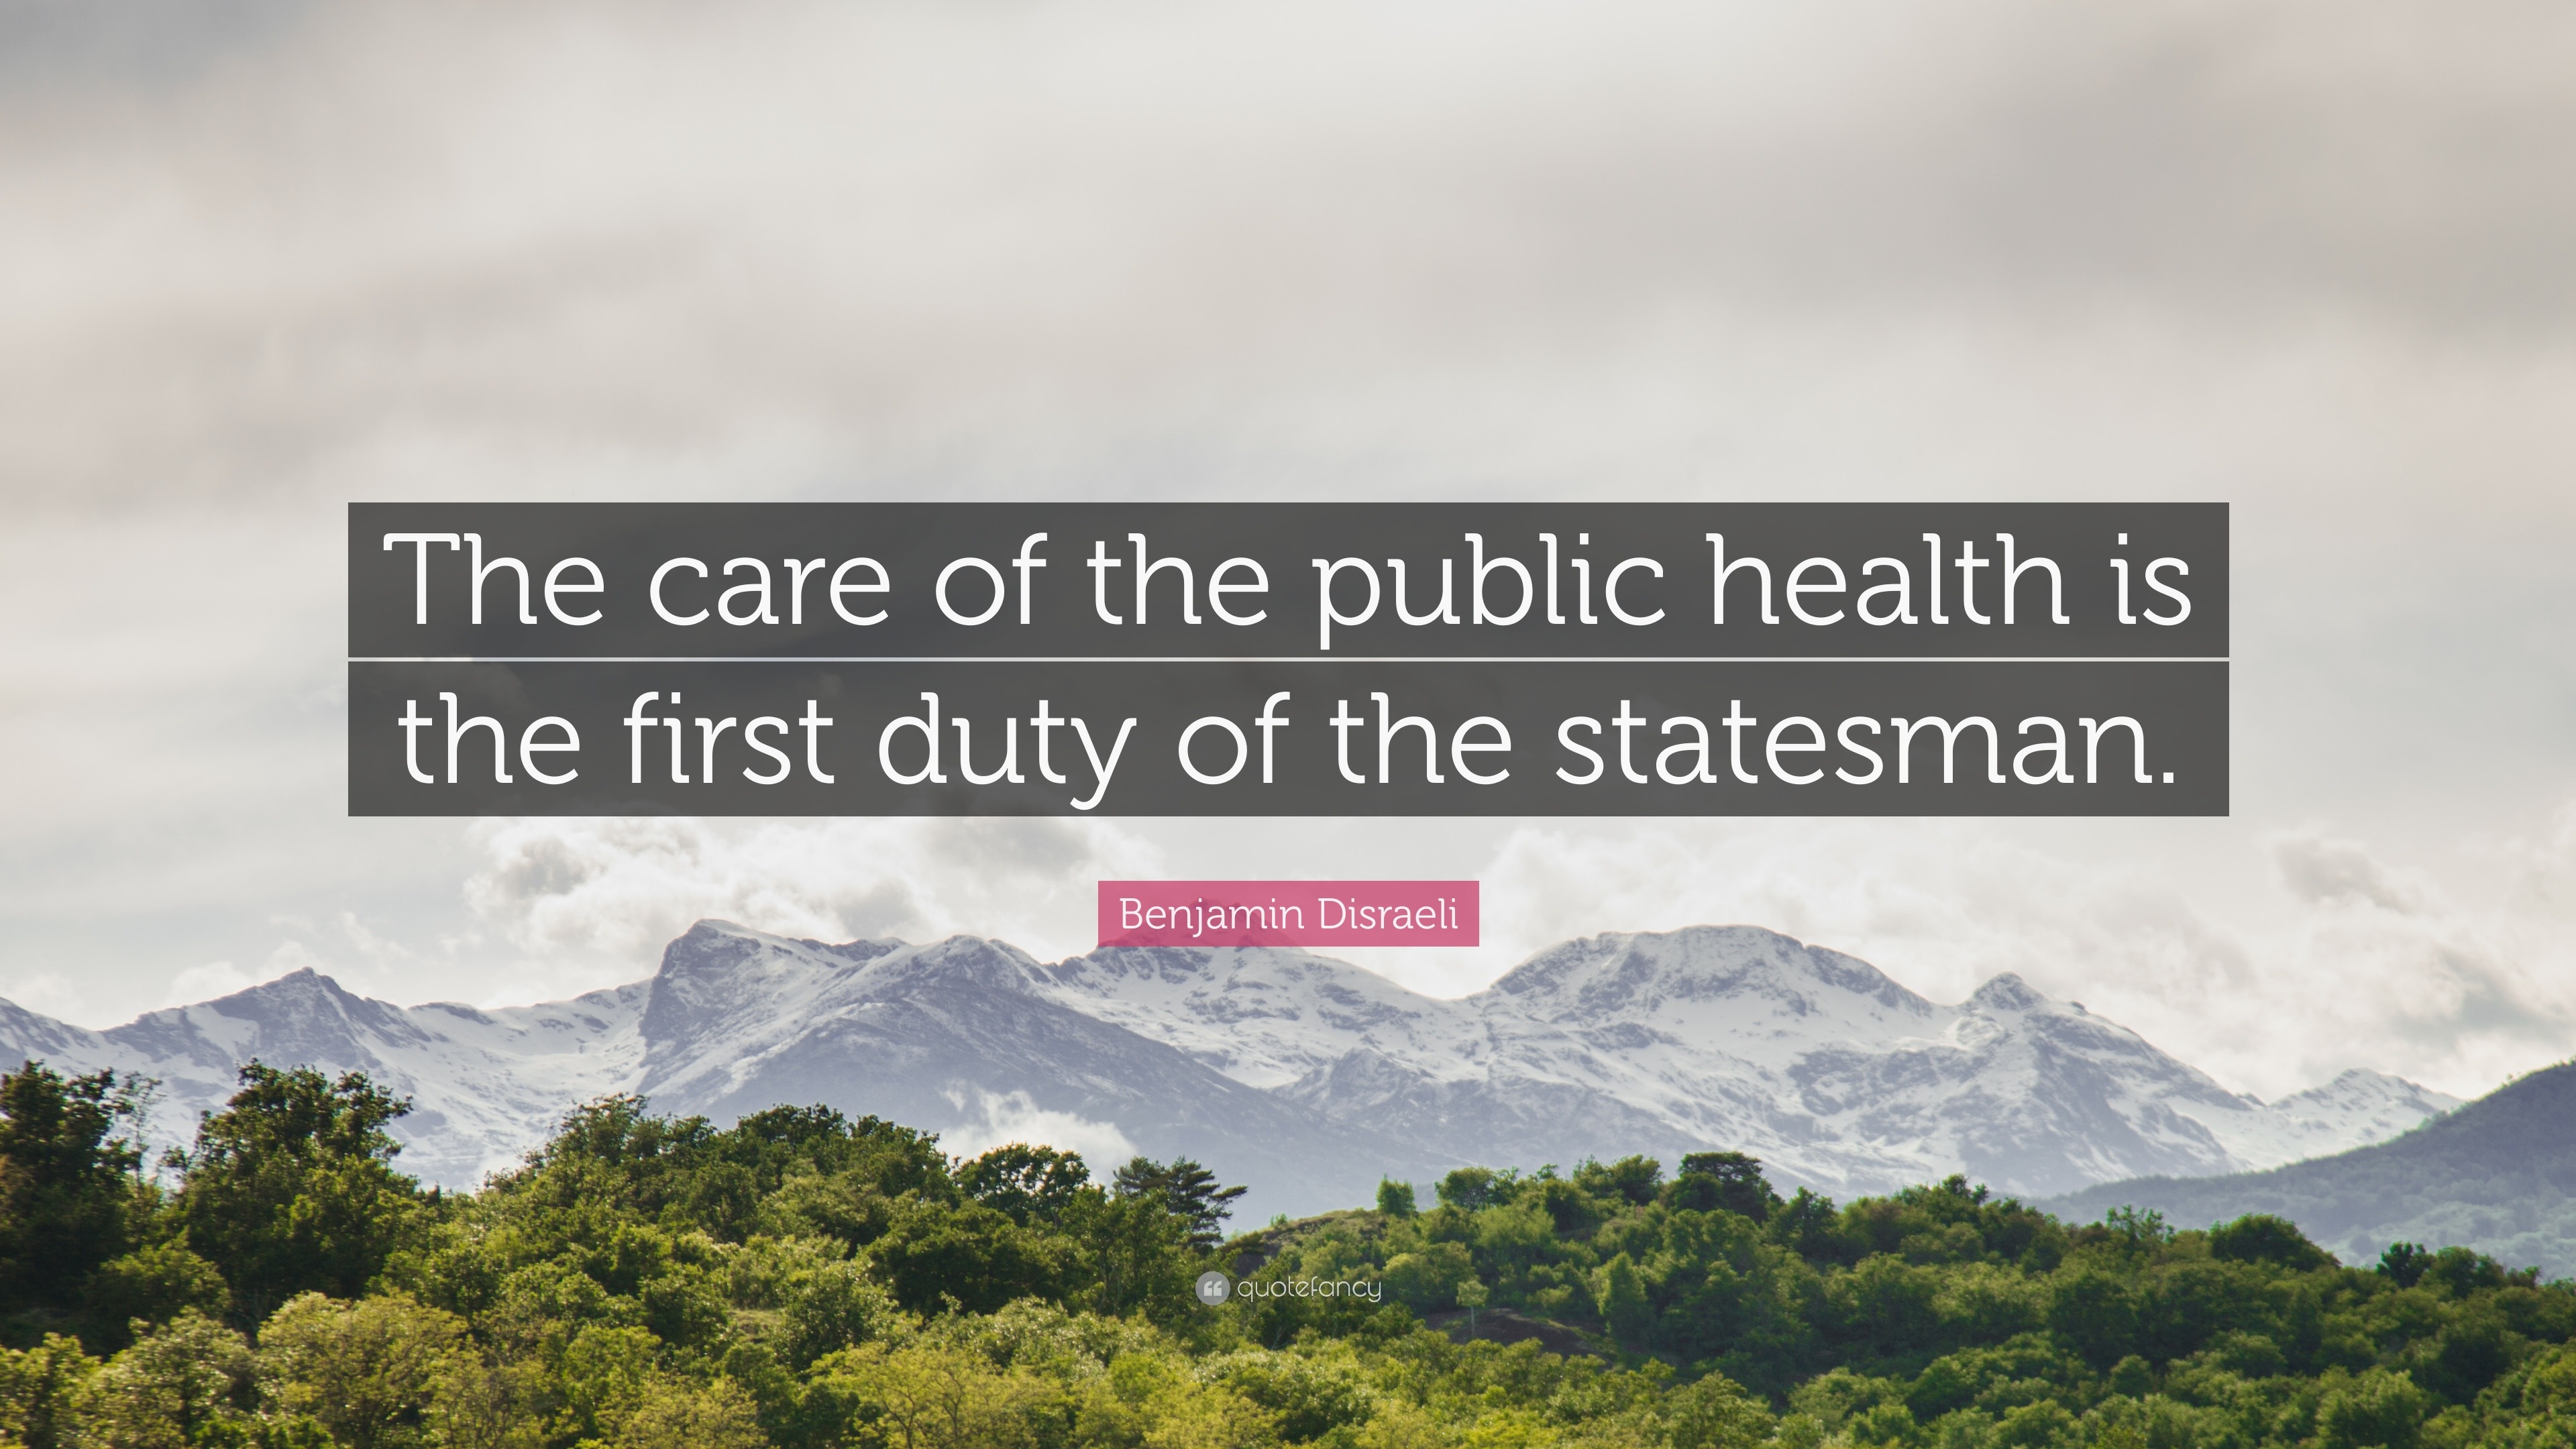 Benjamin Disraeli Quote: “The care of the public health is the first duty  of the statesman.”